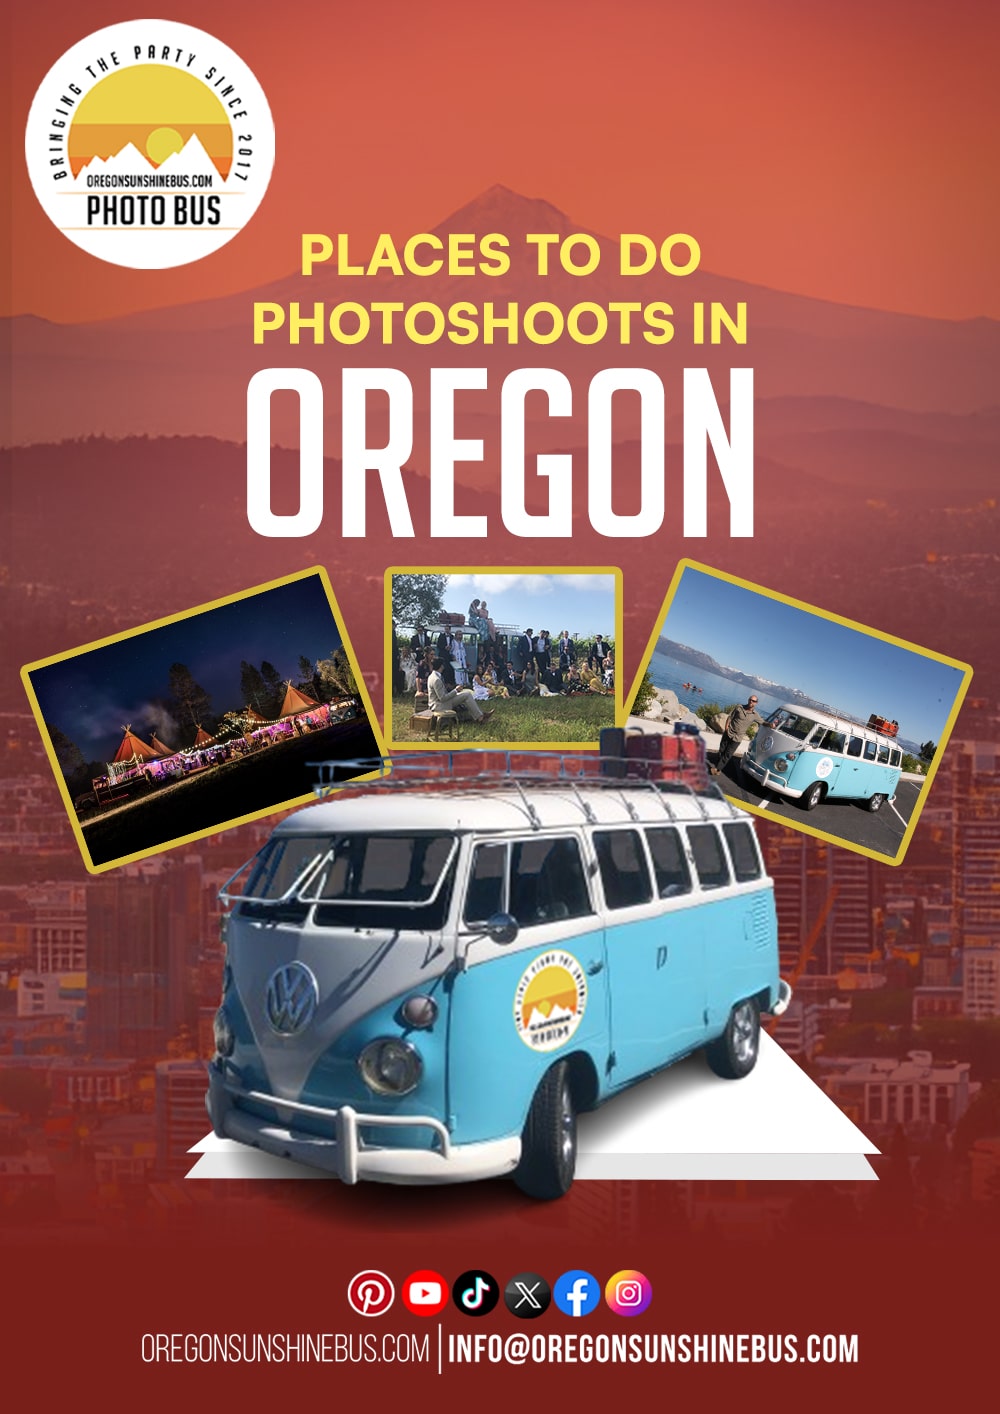 Capture unforgettable Oregon memories with Oregon Sunshine Bus - Other Events, Photography